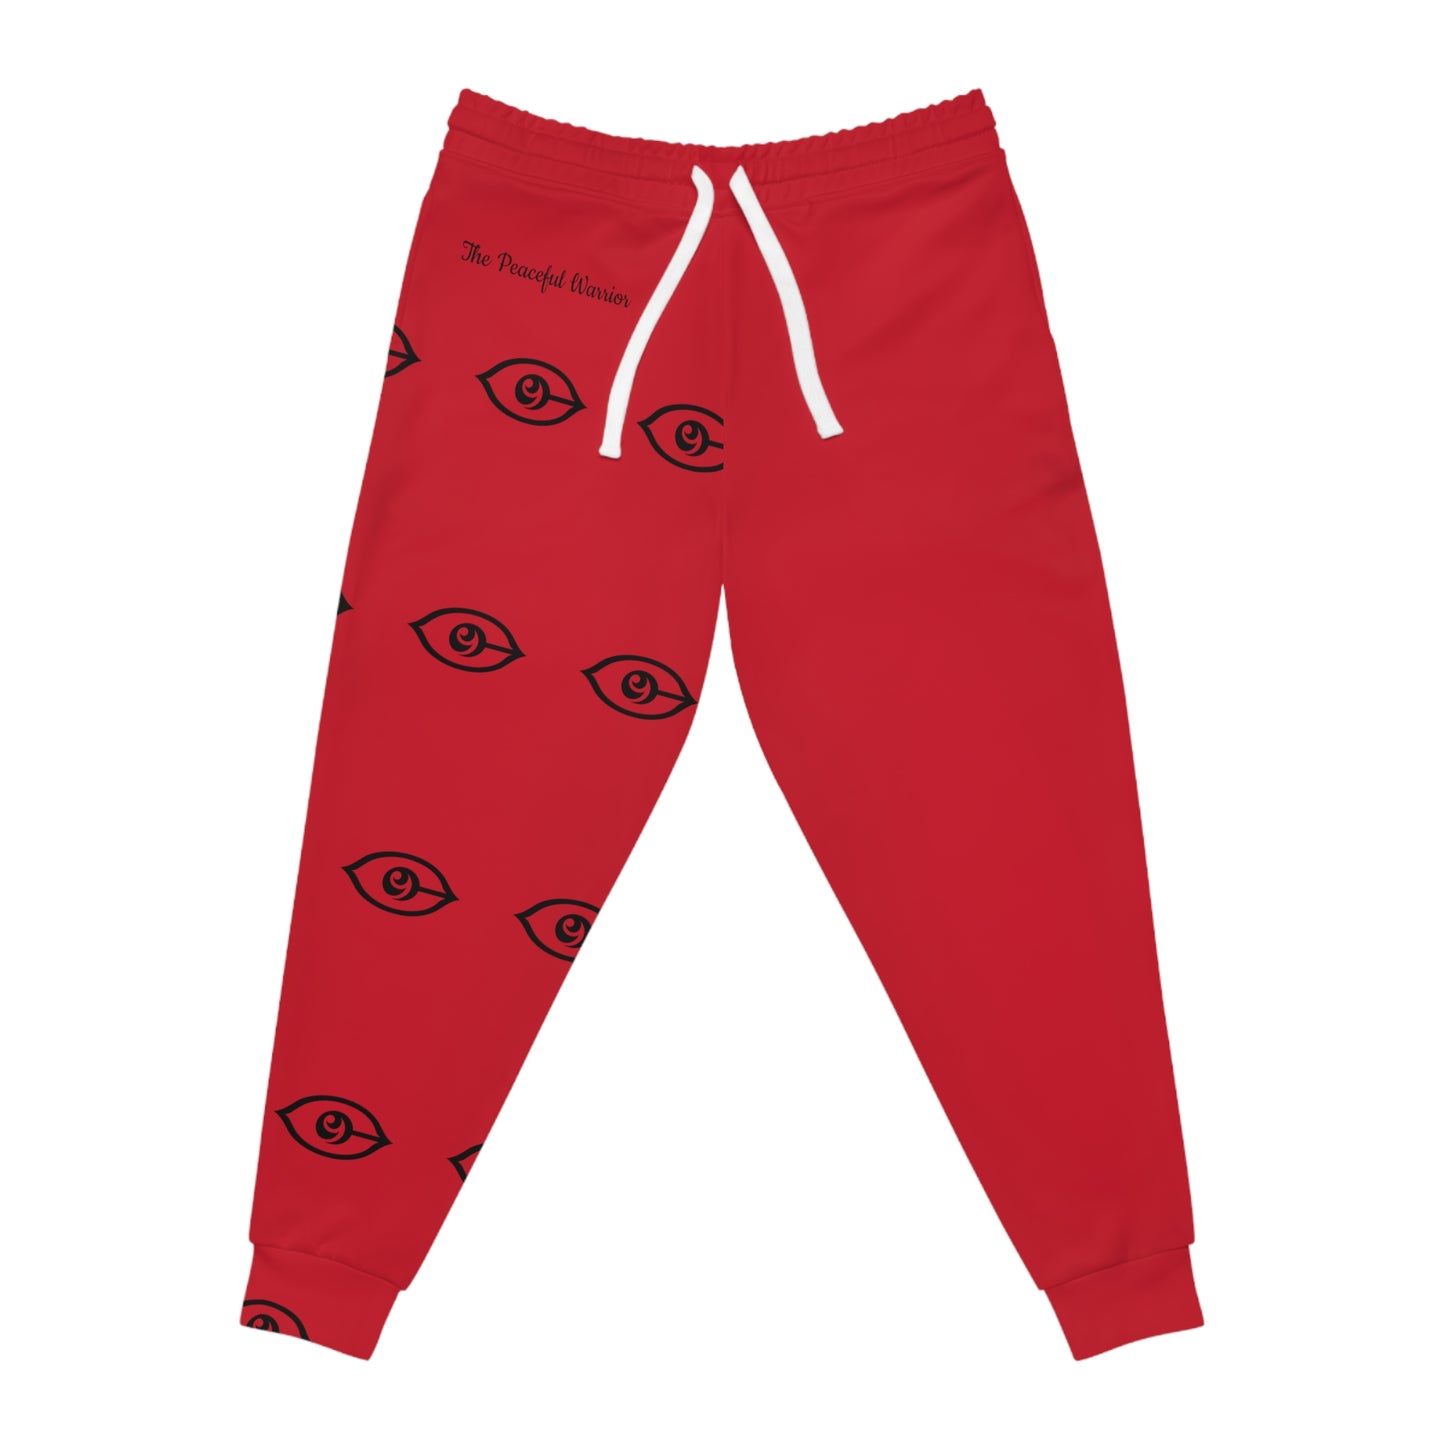 Original CyVision Peaceful Warrior Athletic Joggers